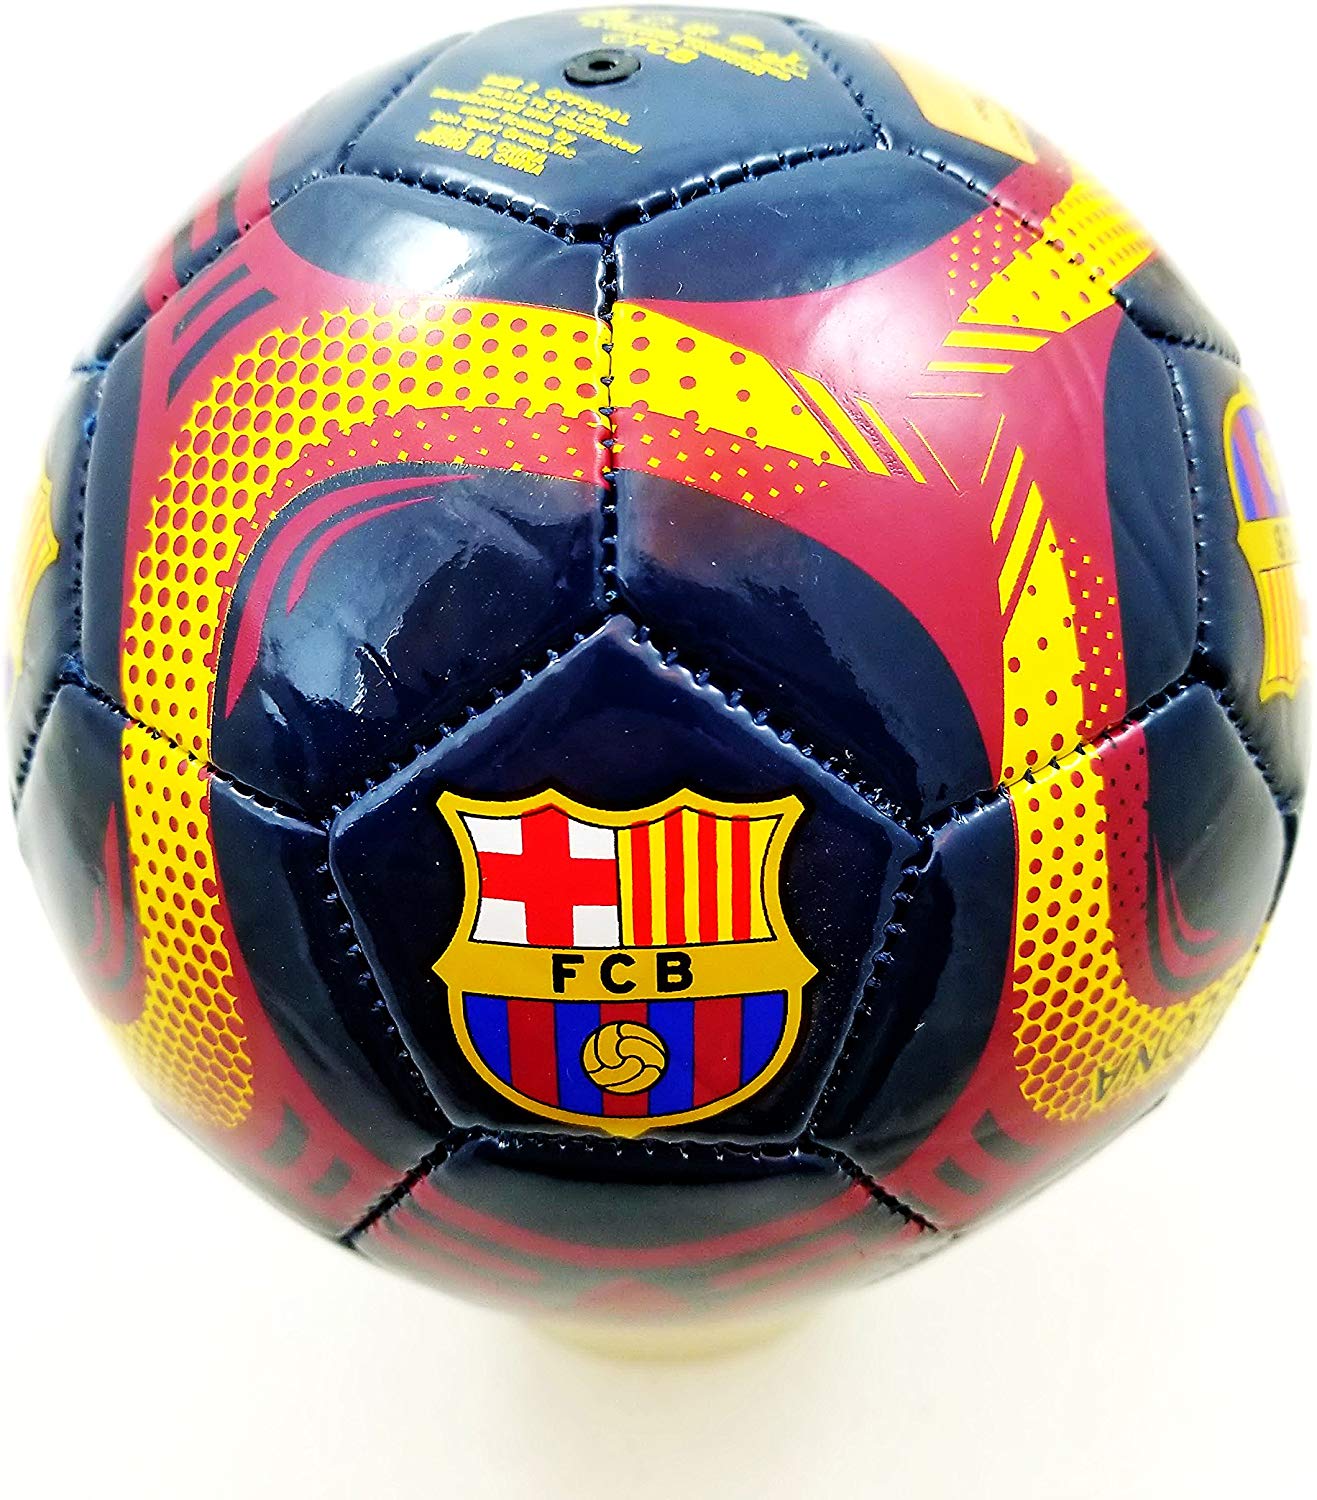 Icon Sports FC Barcelona Soccer Ball Officially Licensed Ball Size 2 01-5 - image 1 of 2